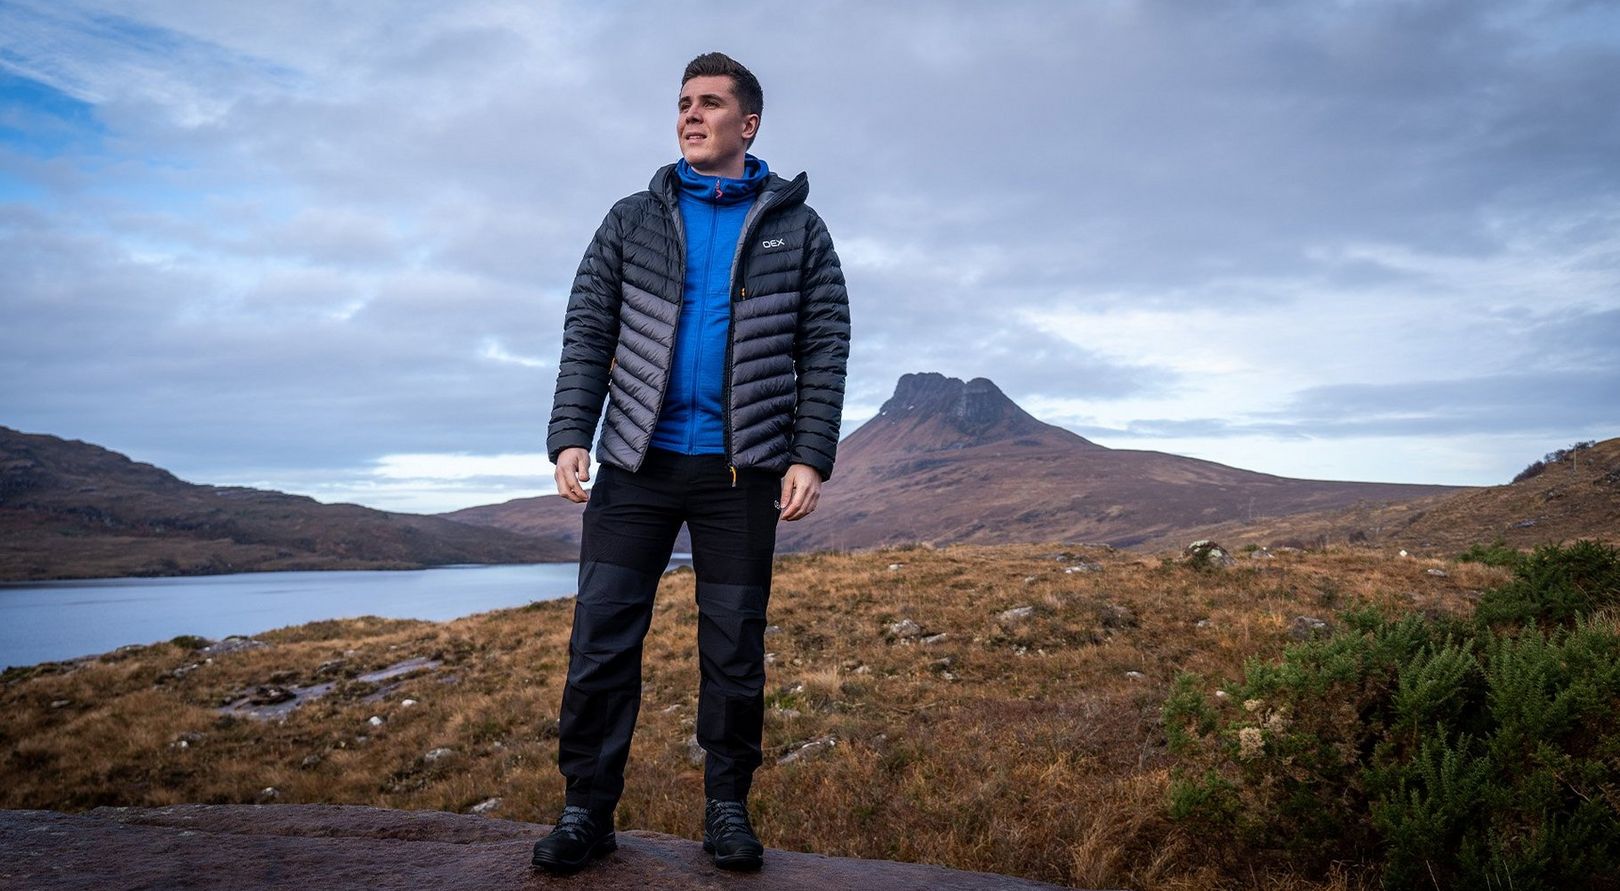 James Coutts wearing OEX gear on Stac Pollaidh mountain in Scotland